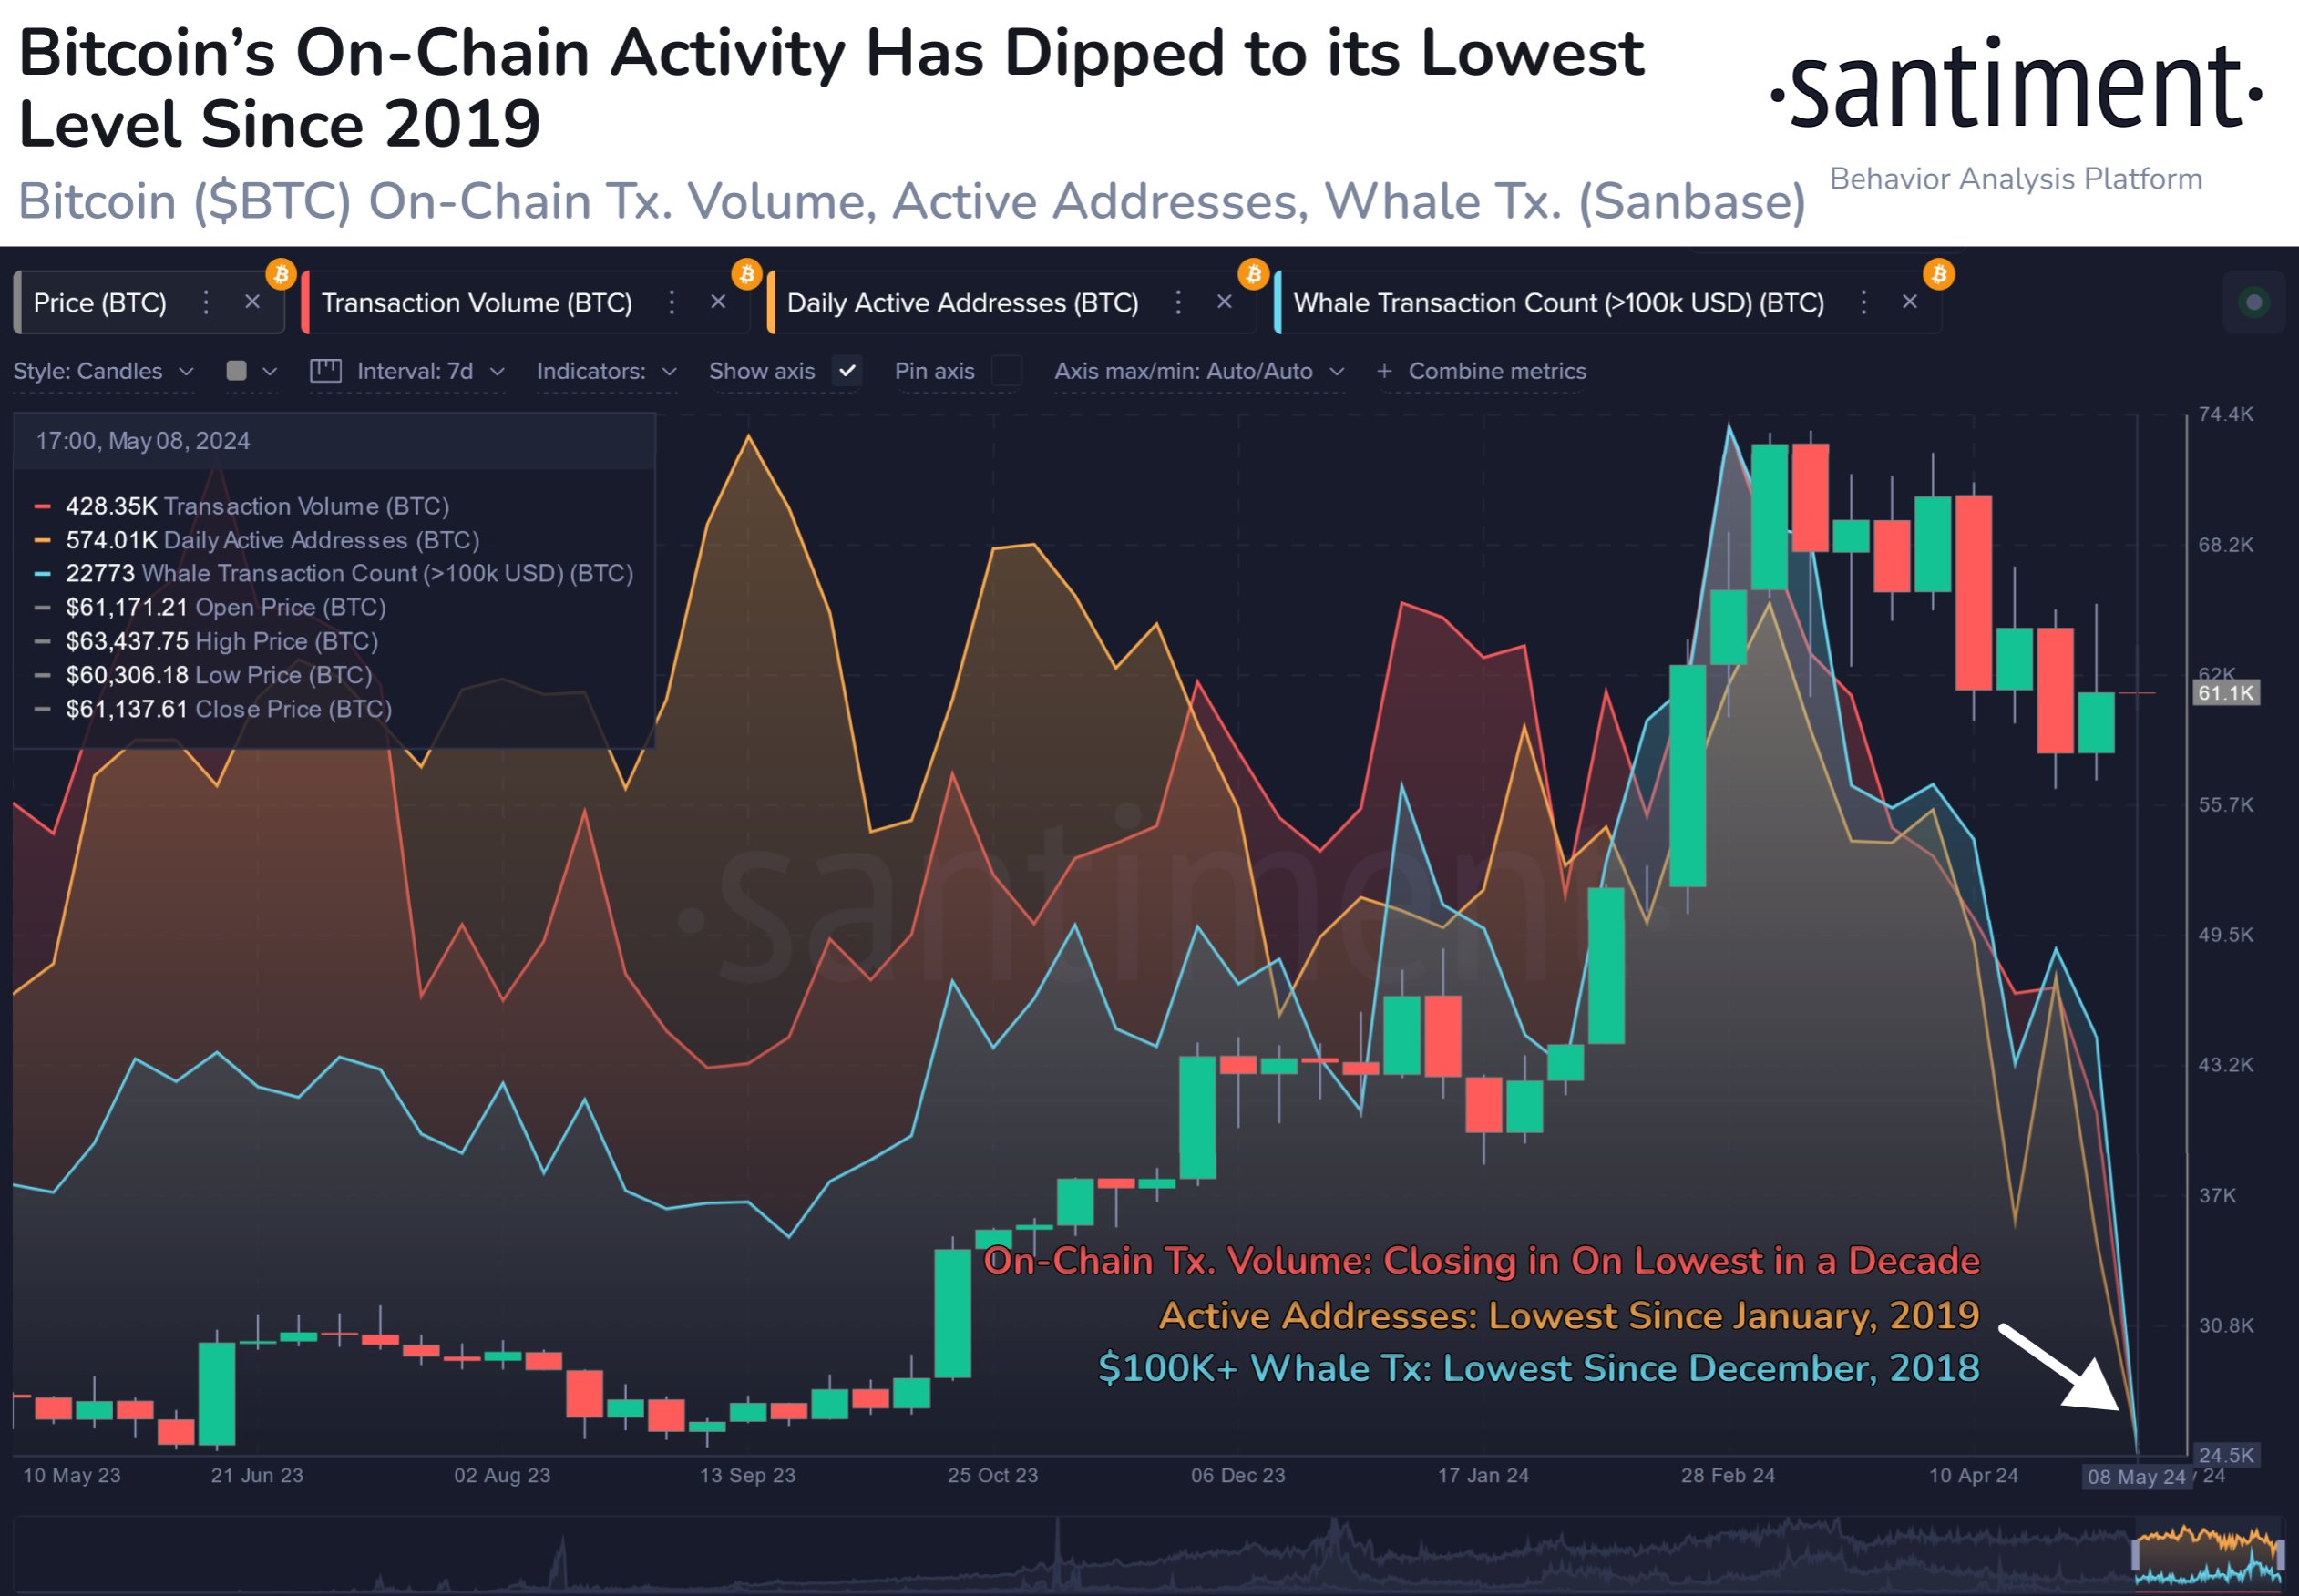 Bitcoin On-Chain Activity Nearing Historic Lows – What This Means For BTC Price